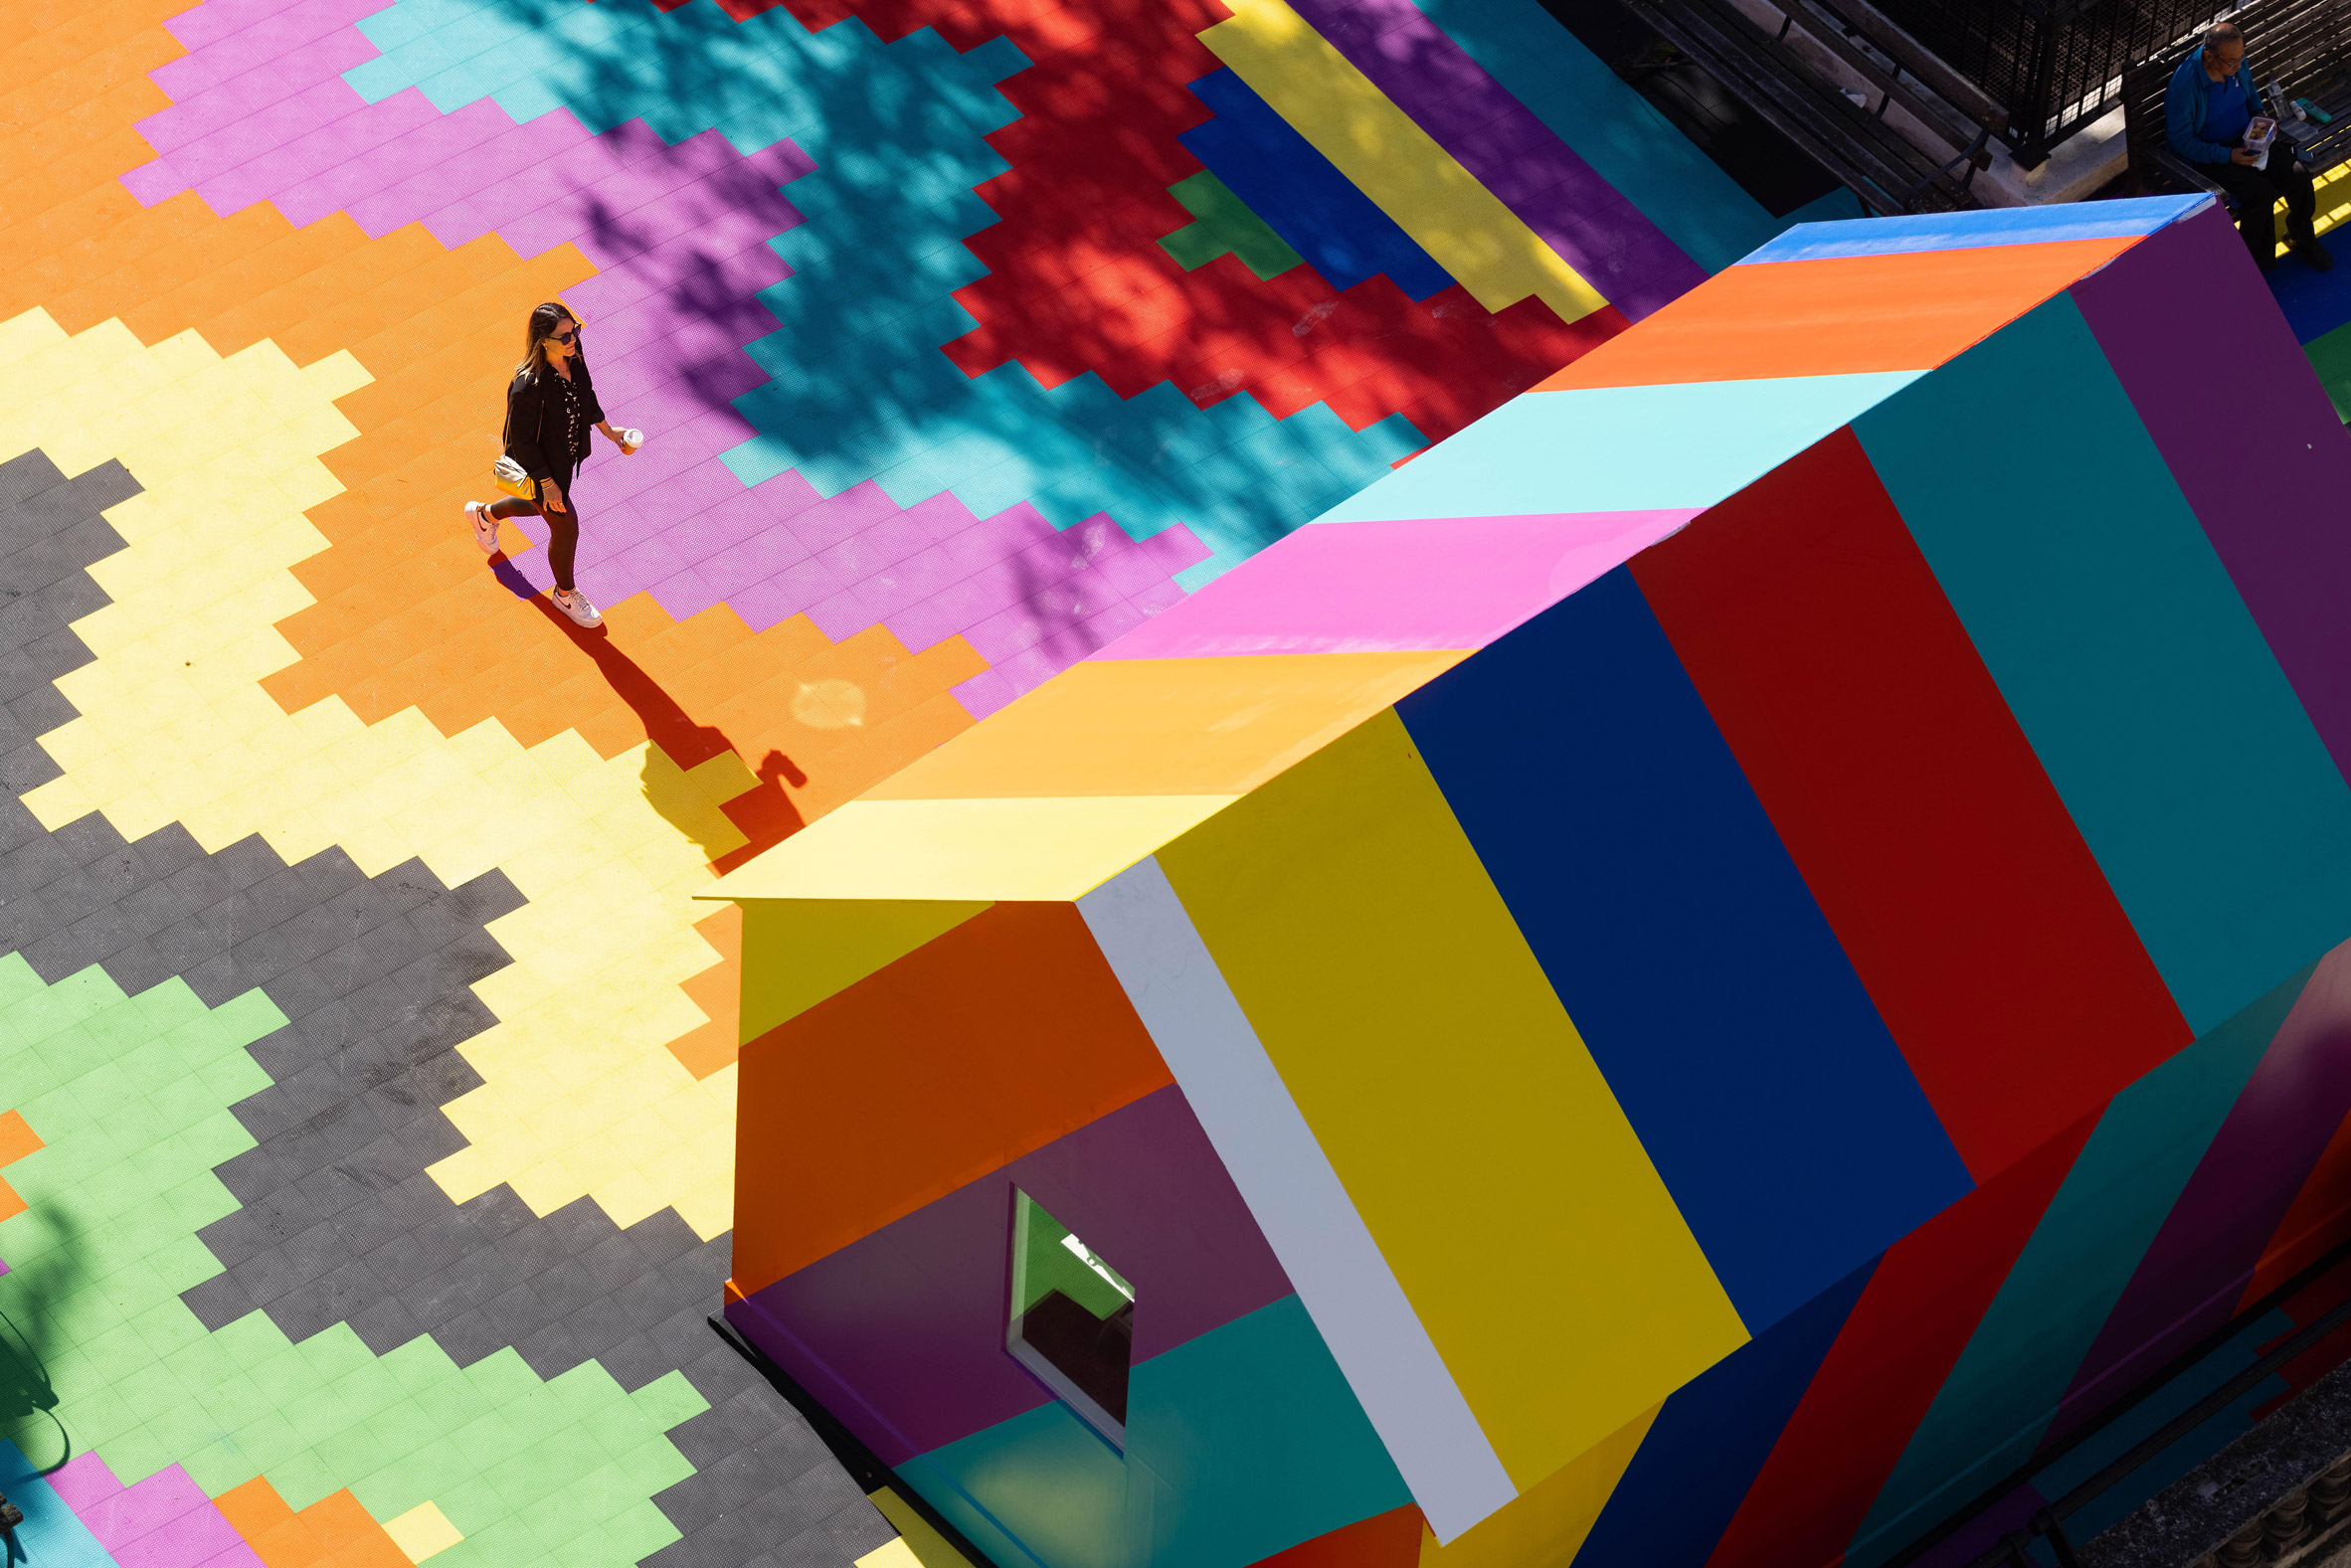 A woman walks across a brightly painted rooftop